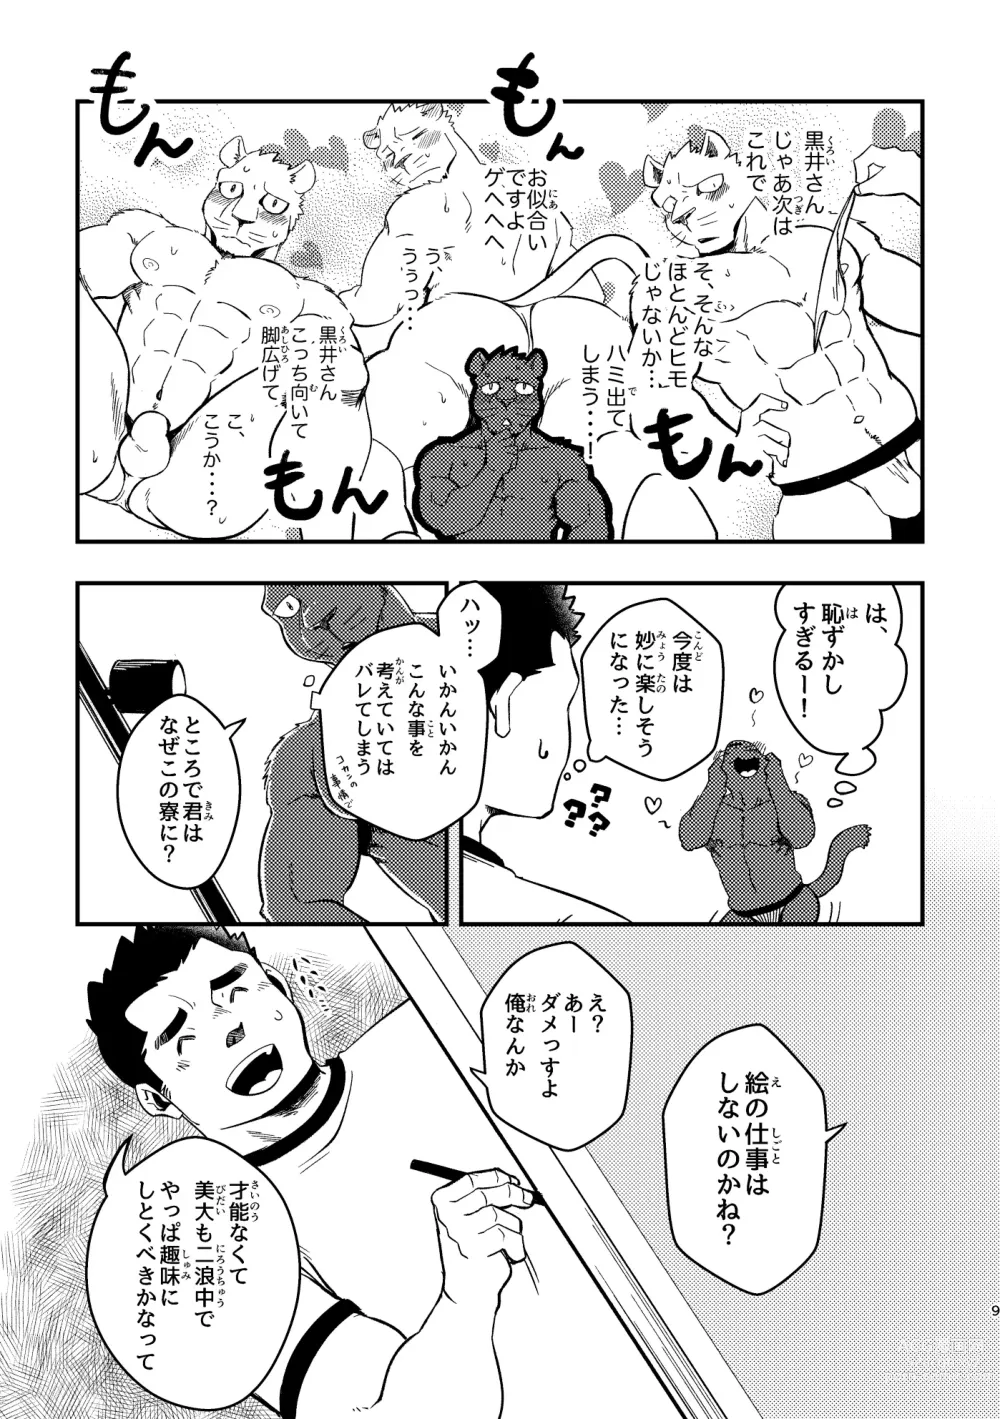 Page 9 of doujinshi Youkoso! Chimi Mouryou Dormitory -Volume 1-